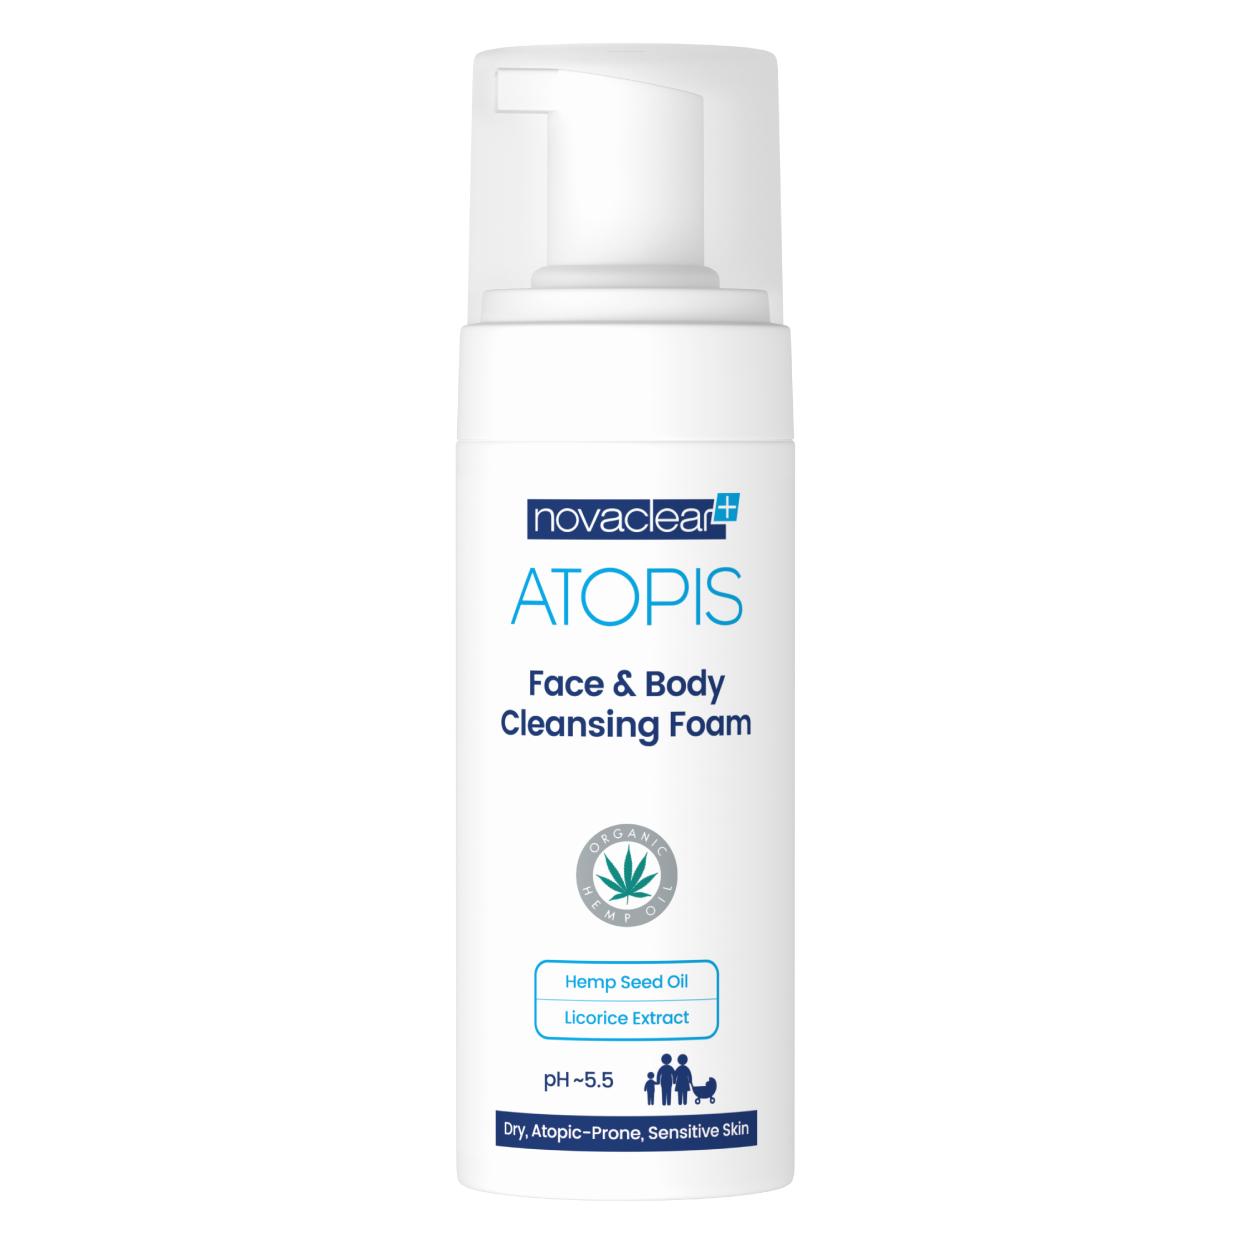 novaclear-atopis-face-and-body-cleansing-foam